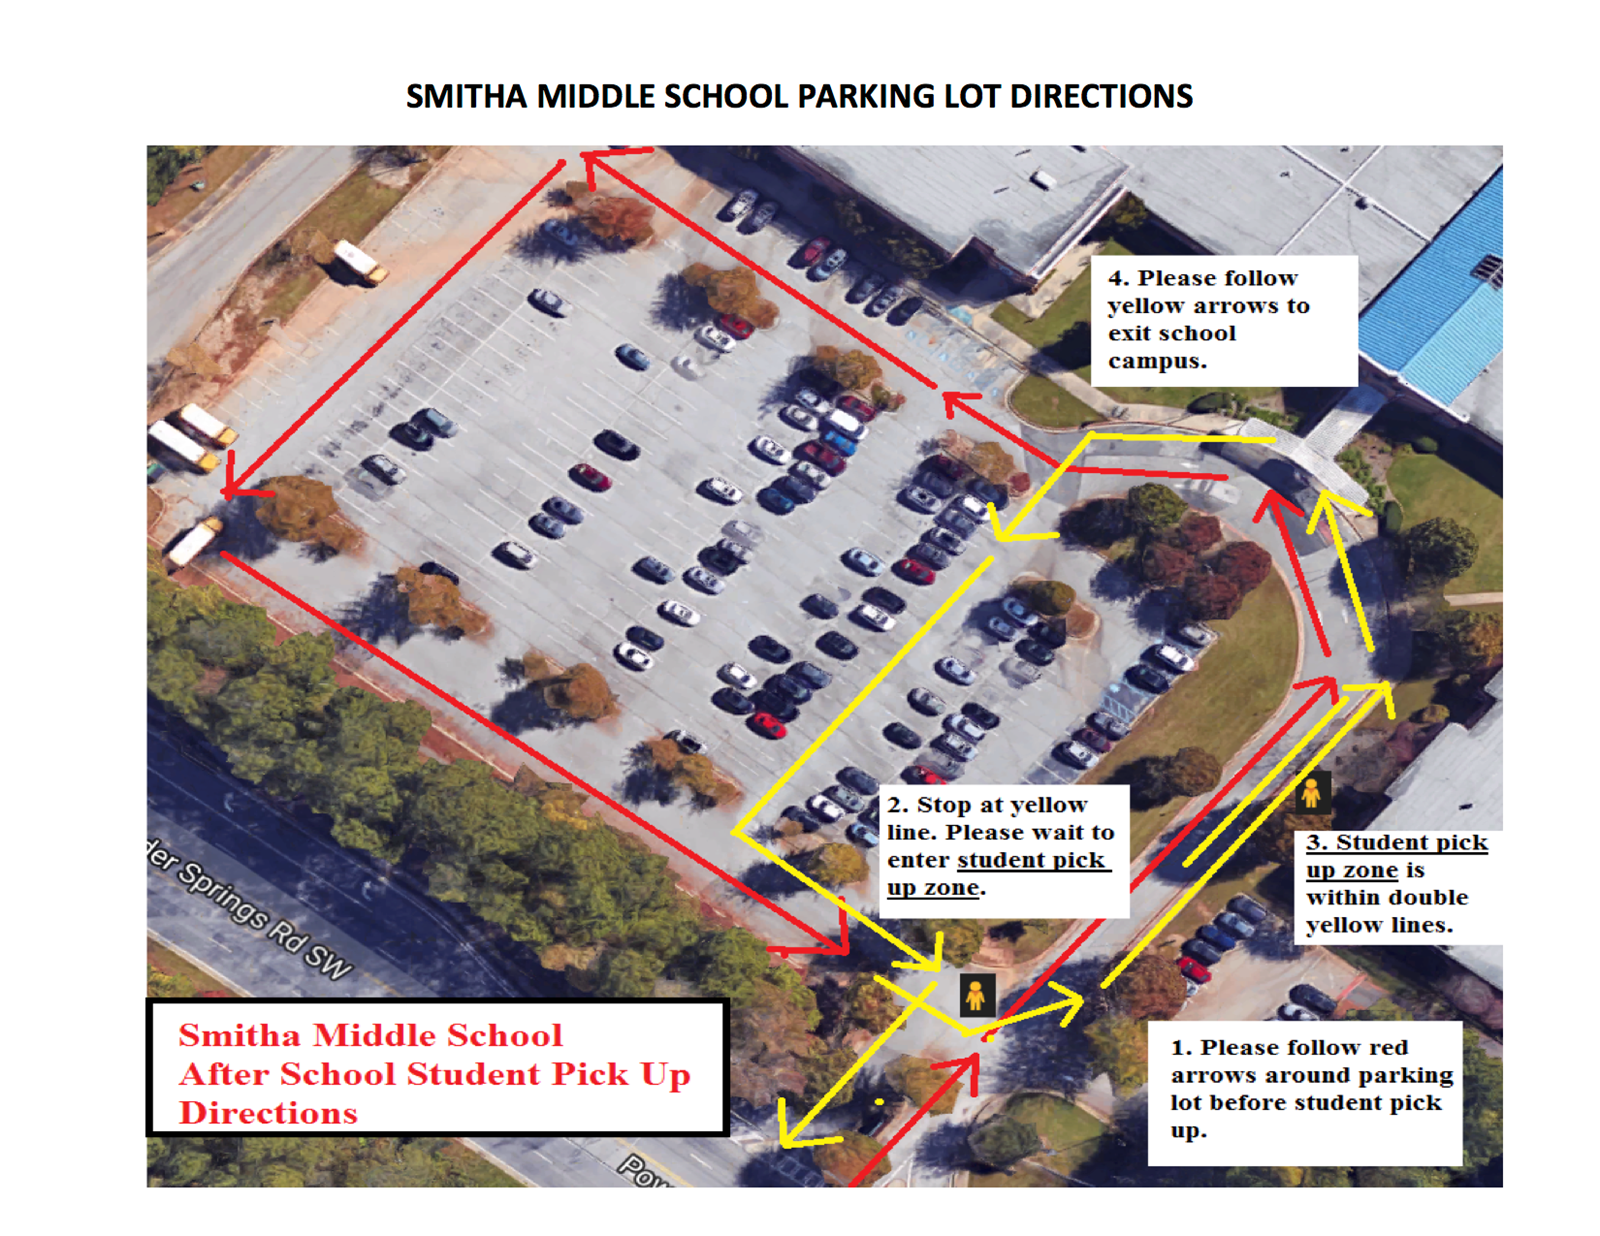 Aerial photo of parking lot with after school pick up directions. 1. Follow red and yellow arrows around parking lot before student pick up. 2. stop at the yellow line and wait to enter the student pick up zone. 3. Student pick up zone is within the double yellow lines. 4. Please follow yellow arrows to exit the school campus.